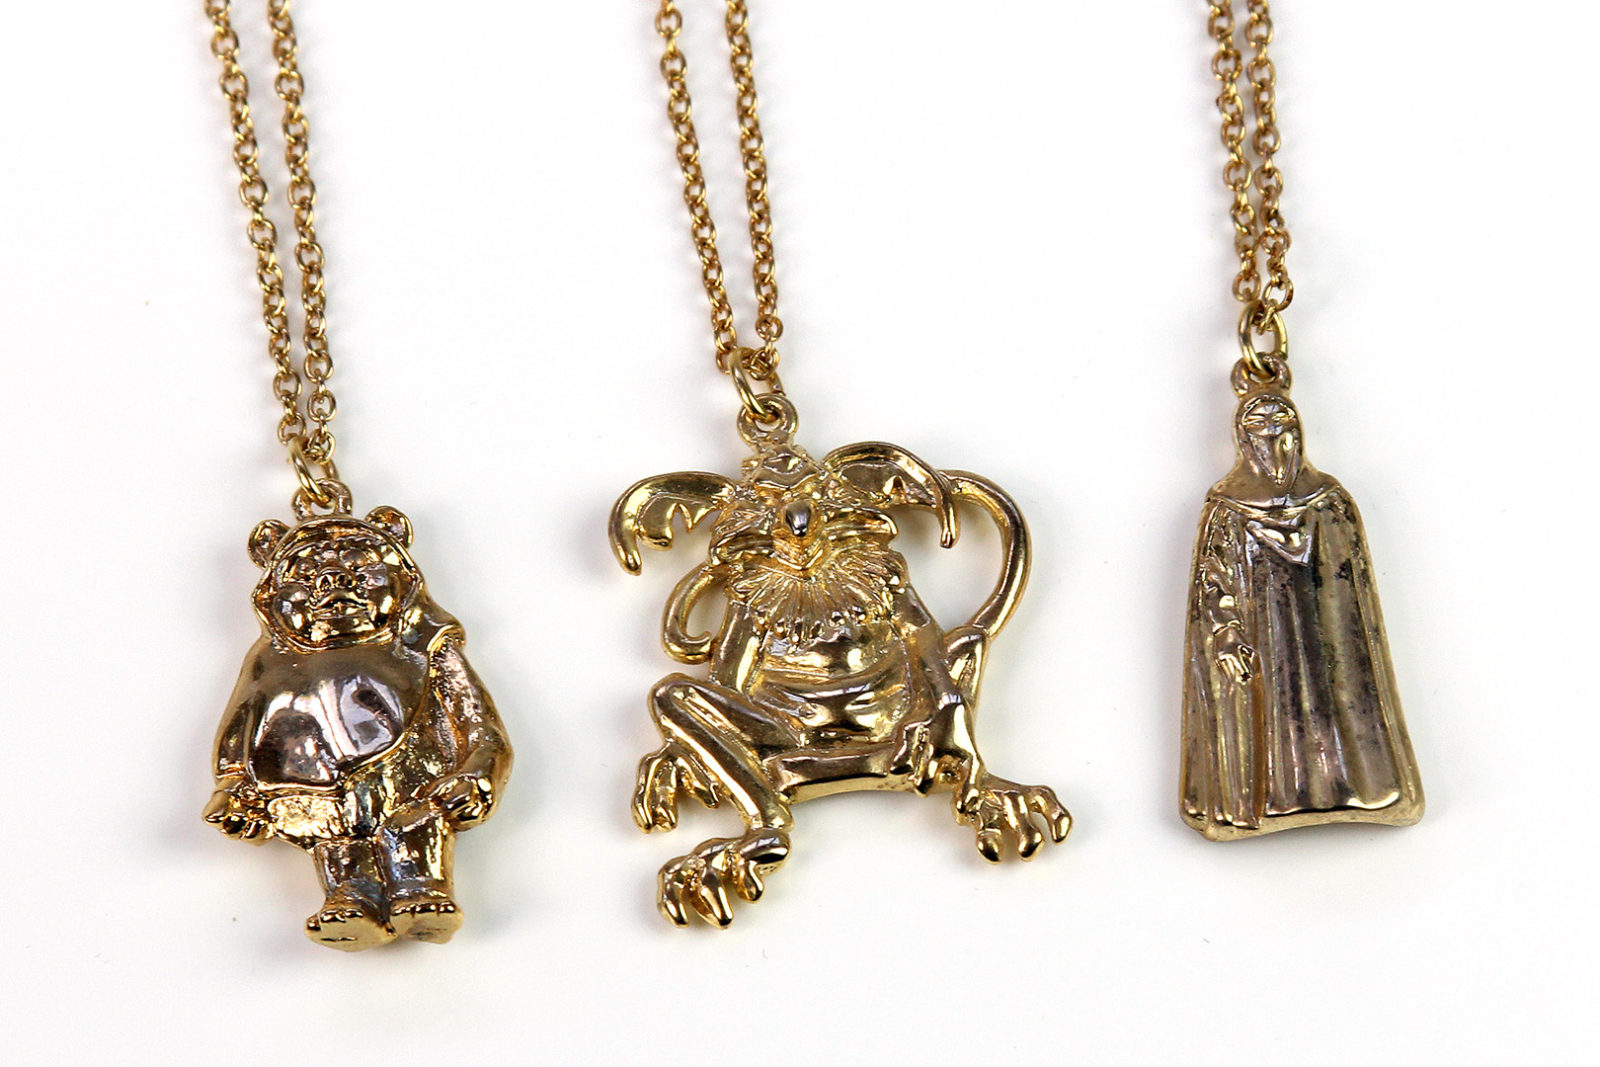 Vintage Star Wars character necklaces by Adam Joseph